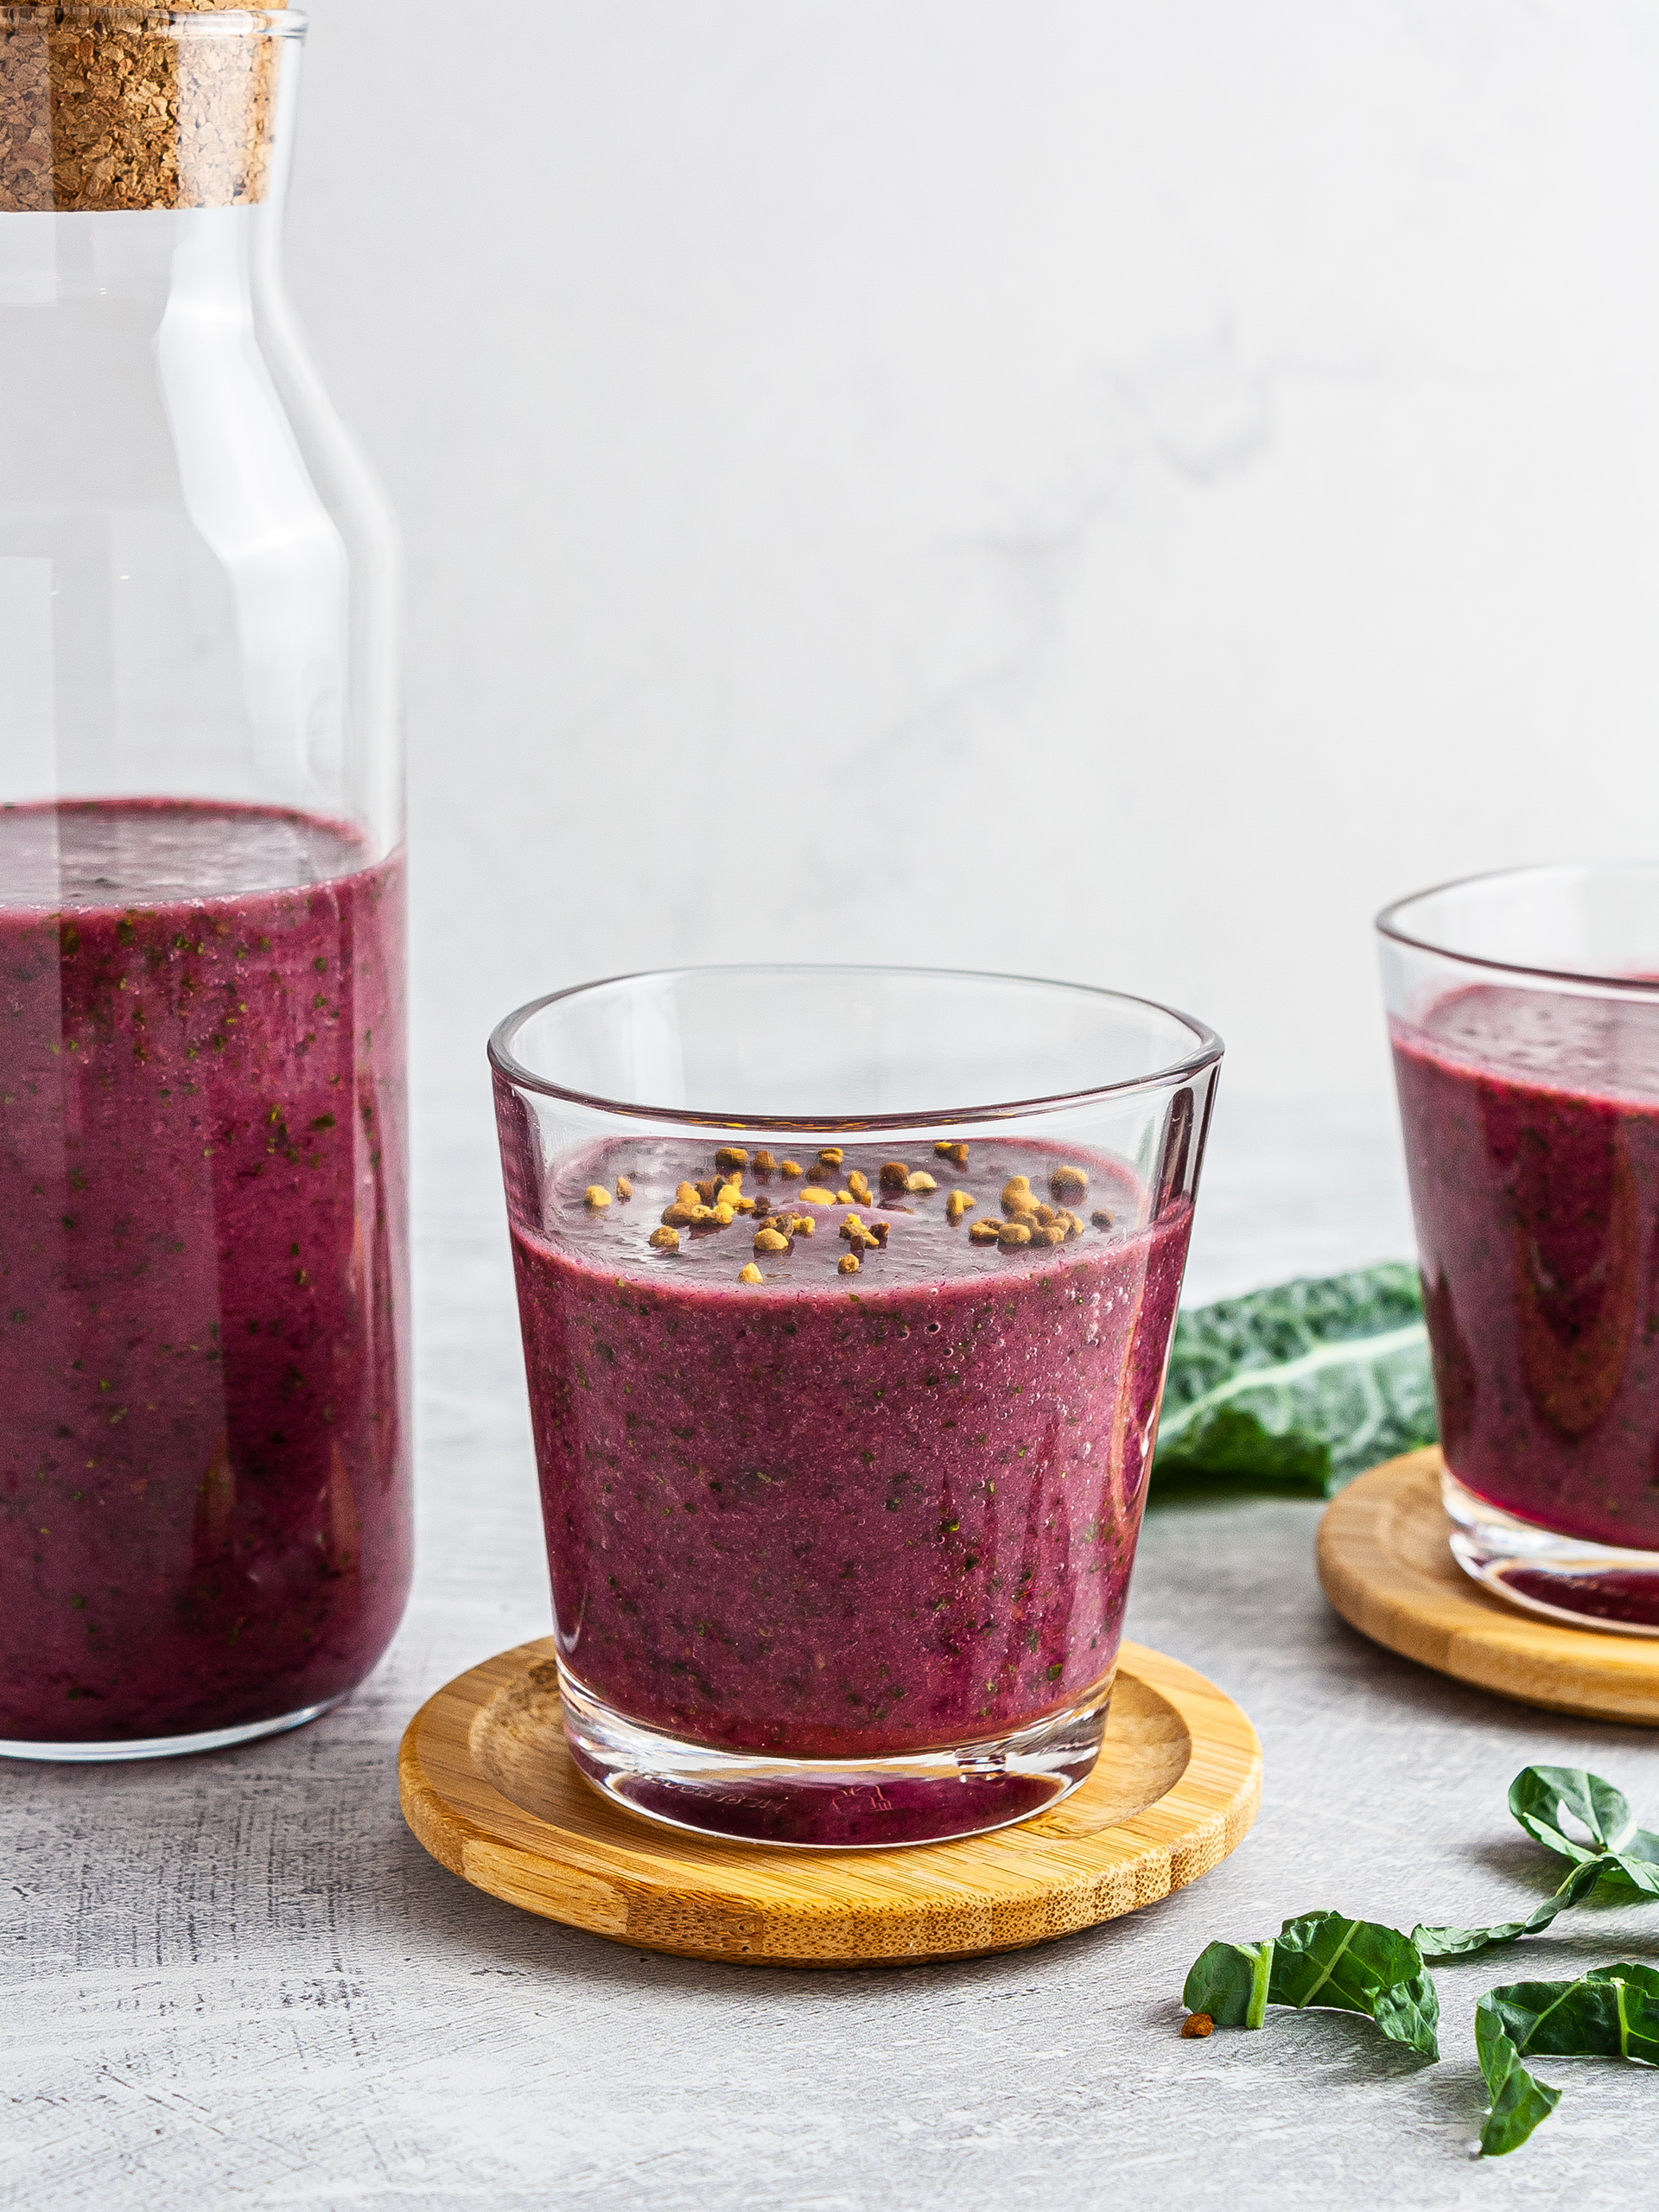 Beet and Kale Smoothie Recipe